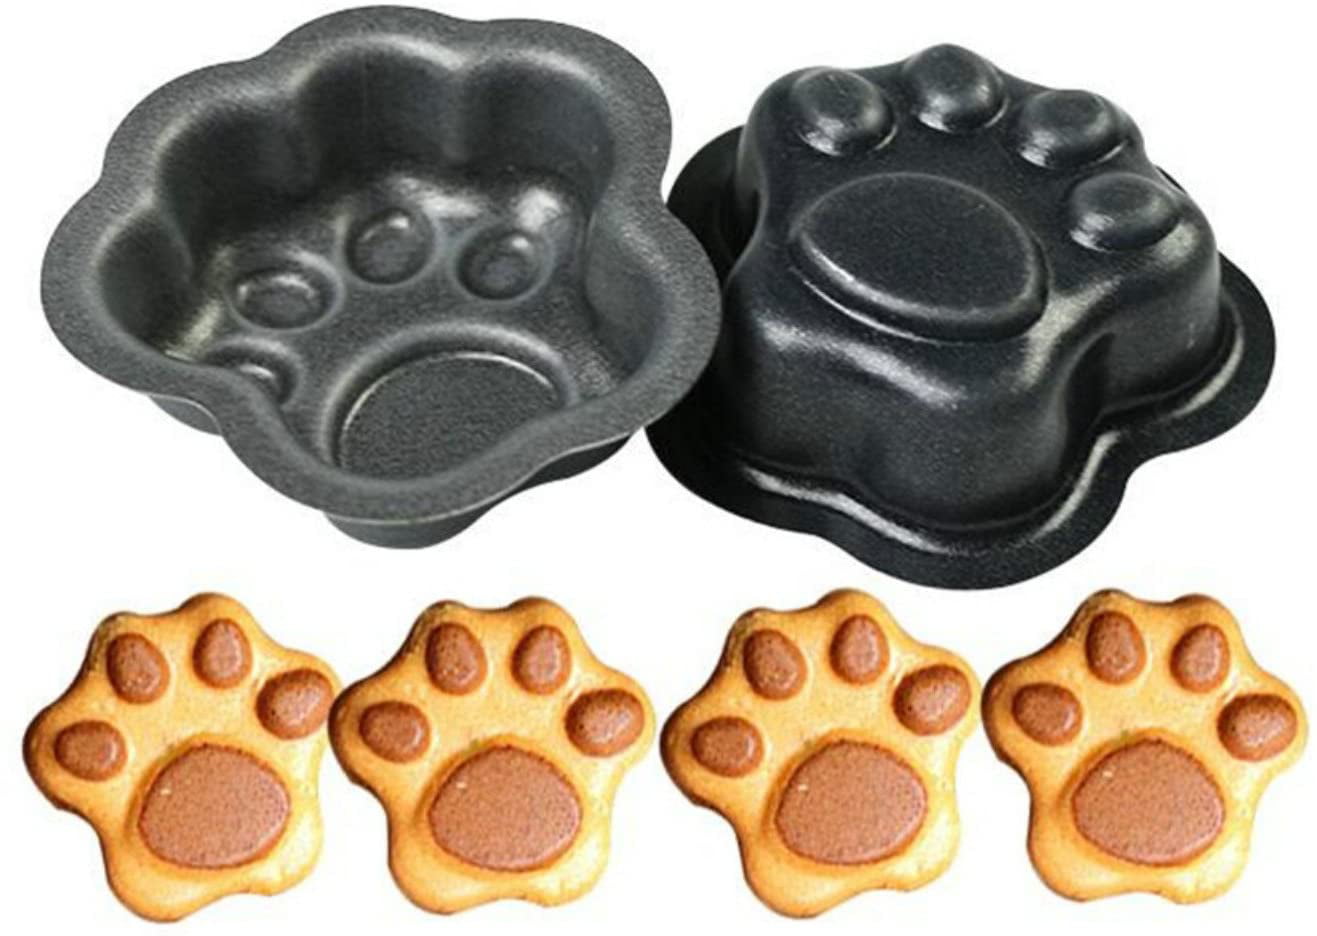 16 Holes Pets Cat Dog Paw Silicone Mold Fondant Cake Cookie Mould Baking Tools 